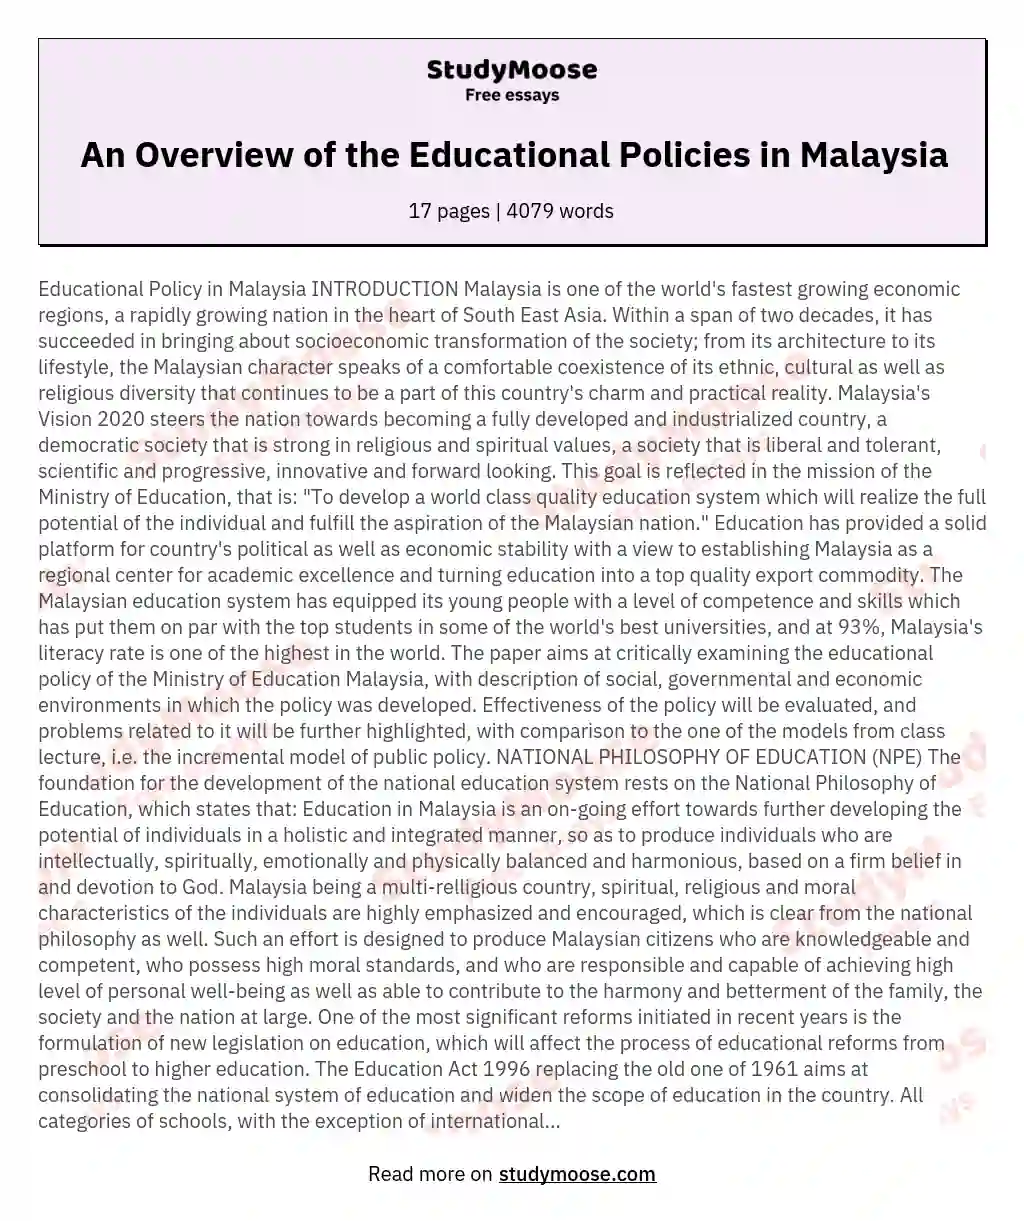 An Overview of the Educational Policies in Malaysia essay